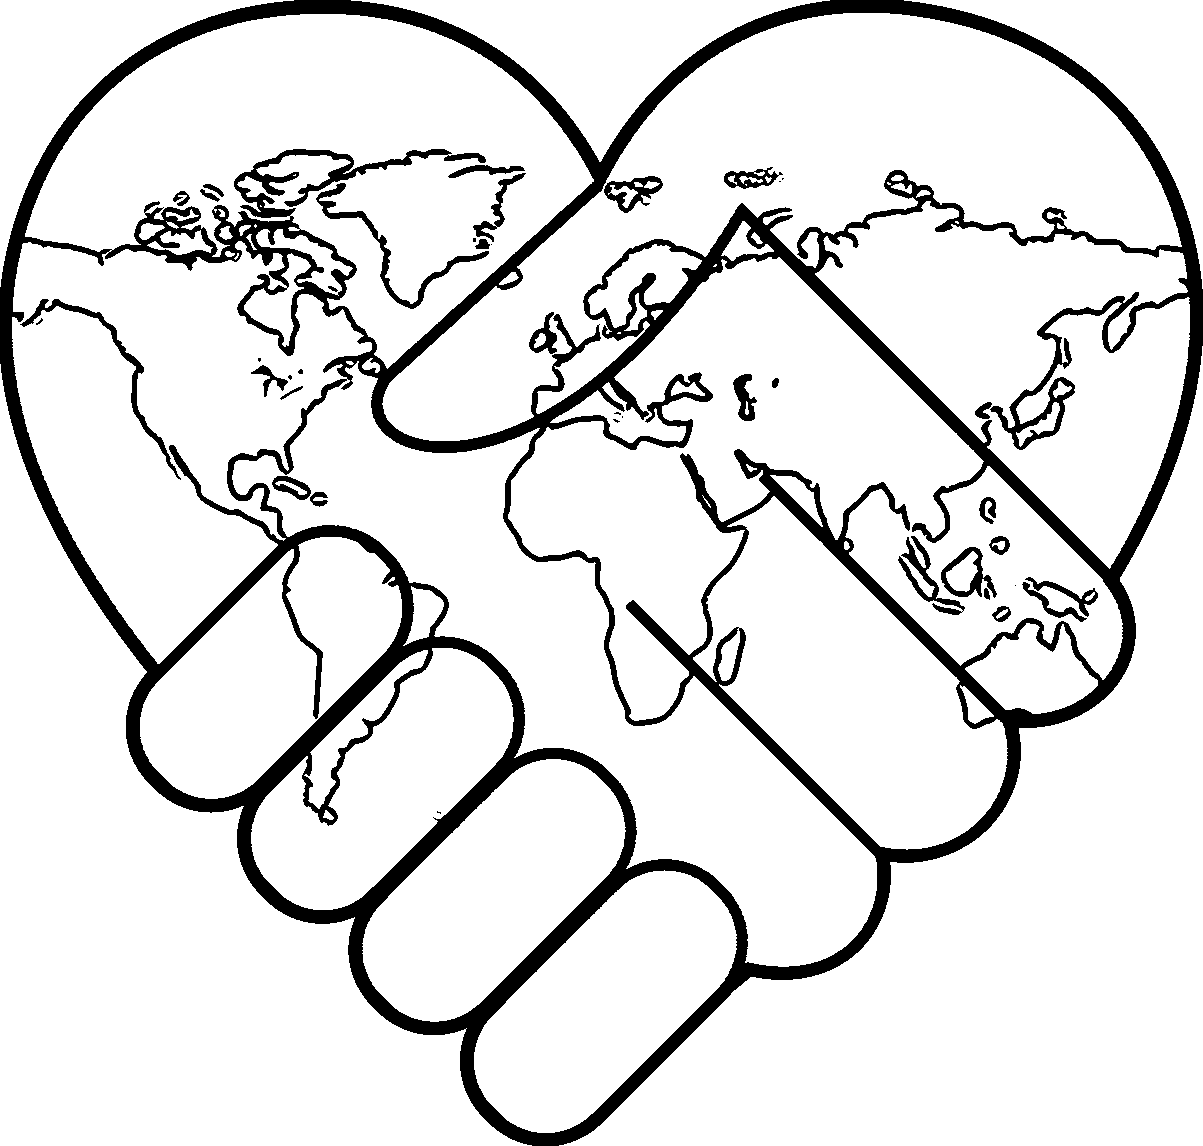 World Peace Coloring Page | Wecoloringpage